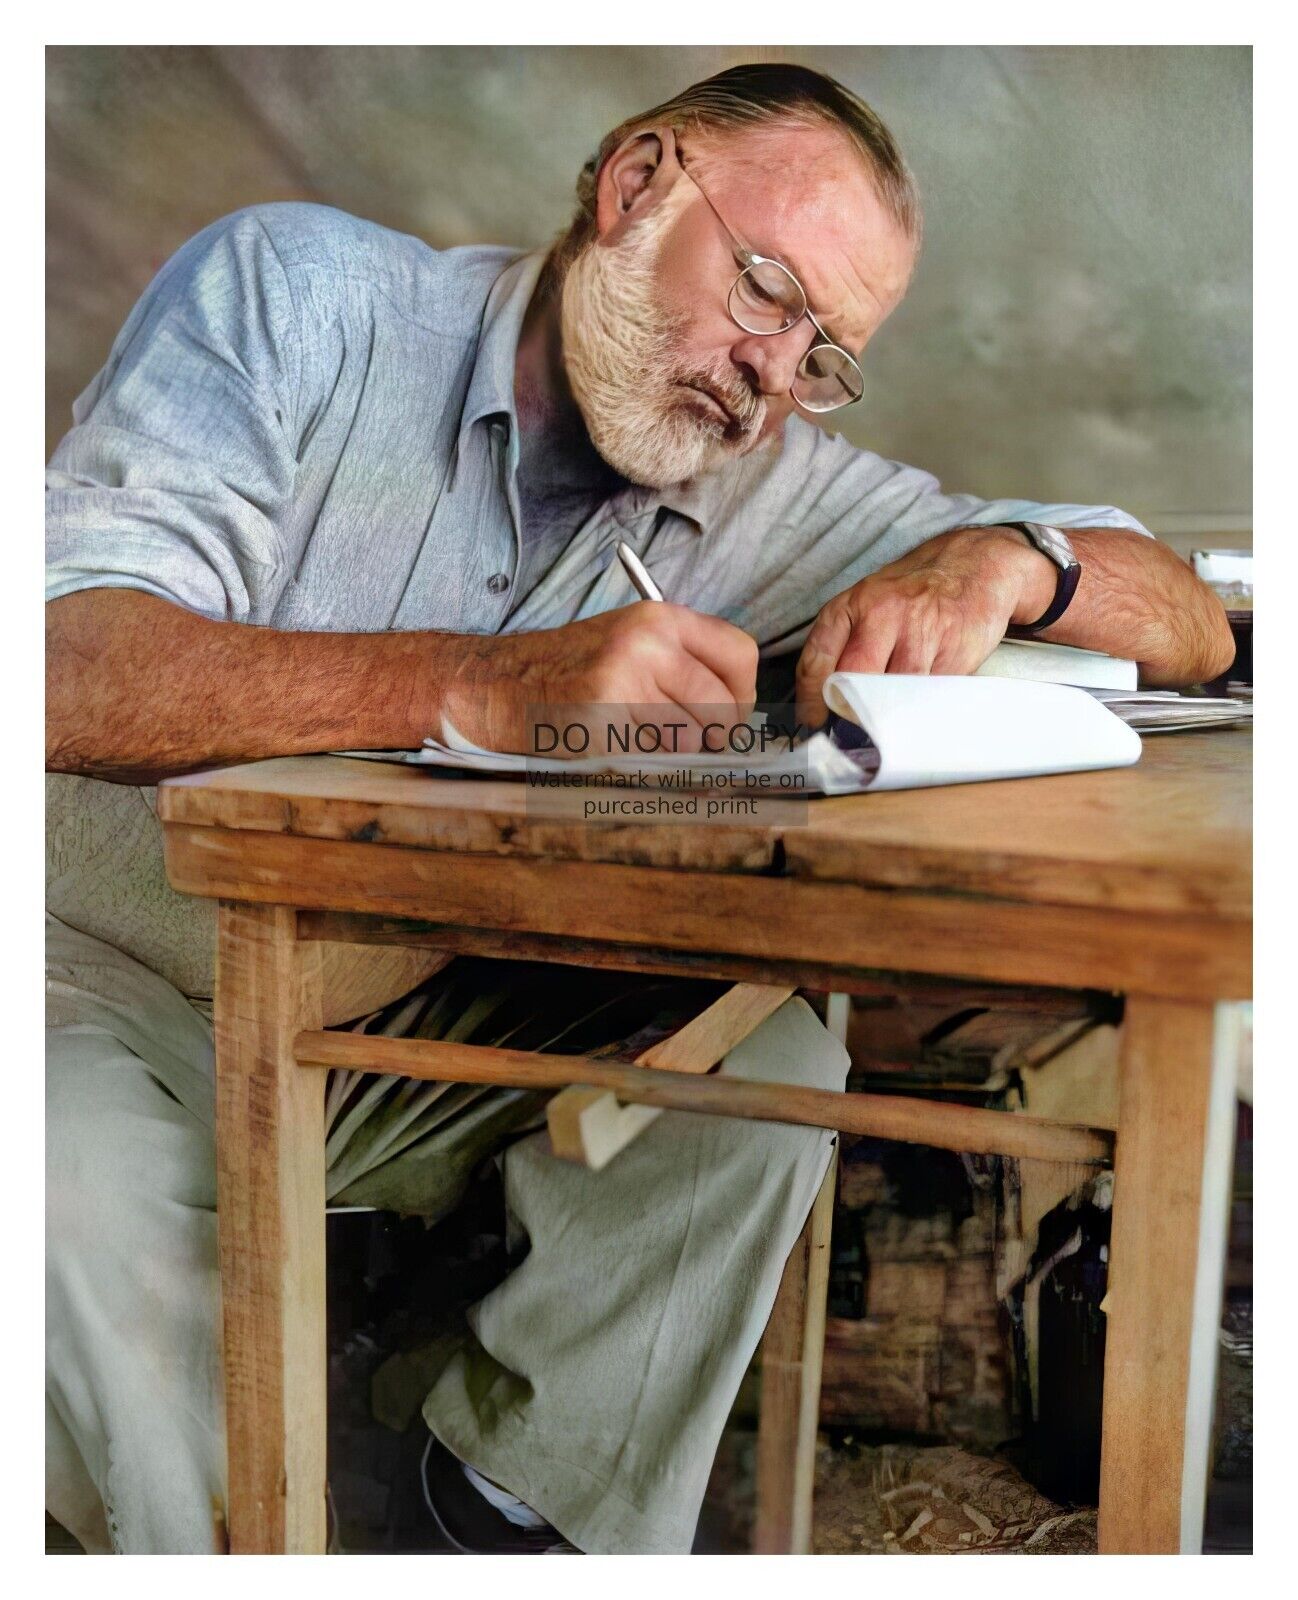 ERNEST HEMINGWAY WRITING IN NOTEPAD 8X10 COLOR PHOTO